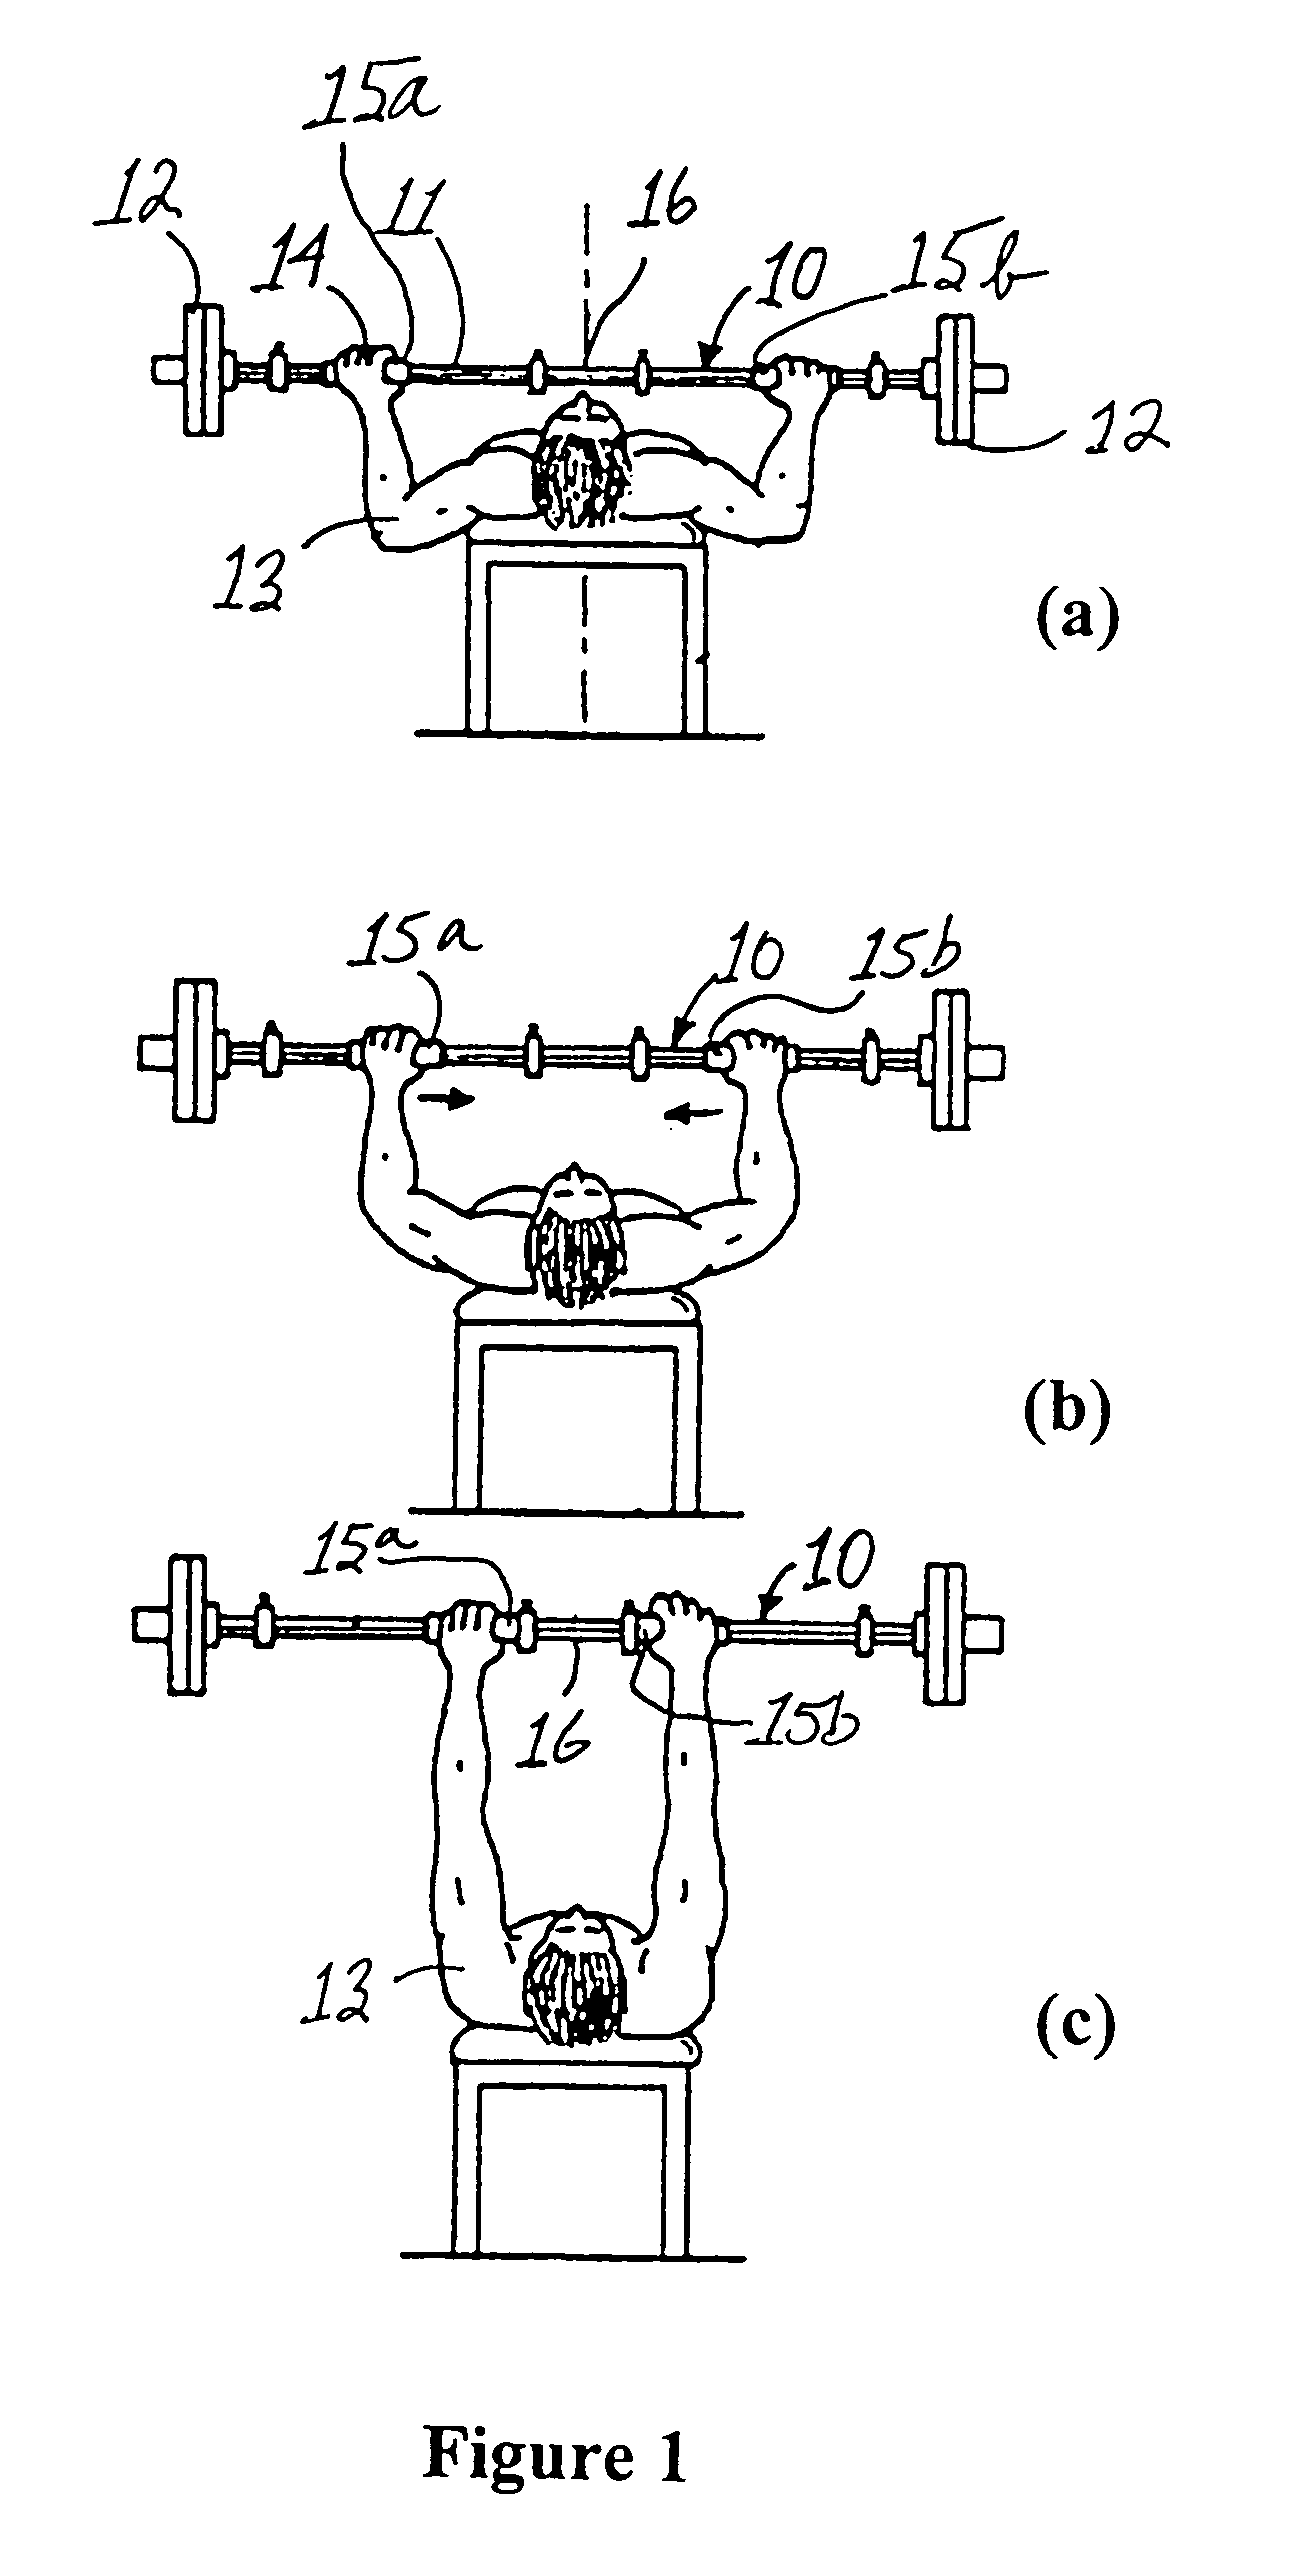 Bar with sliding handgrips for resistance exercise device